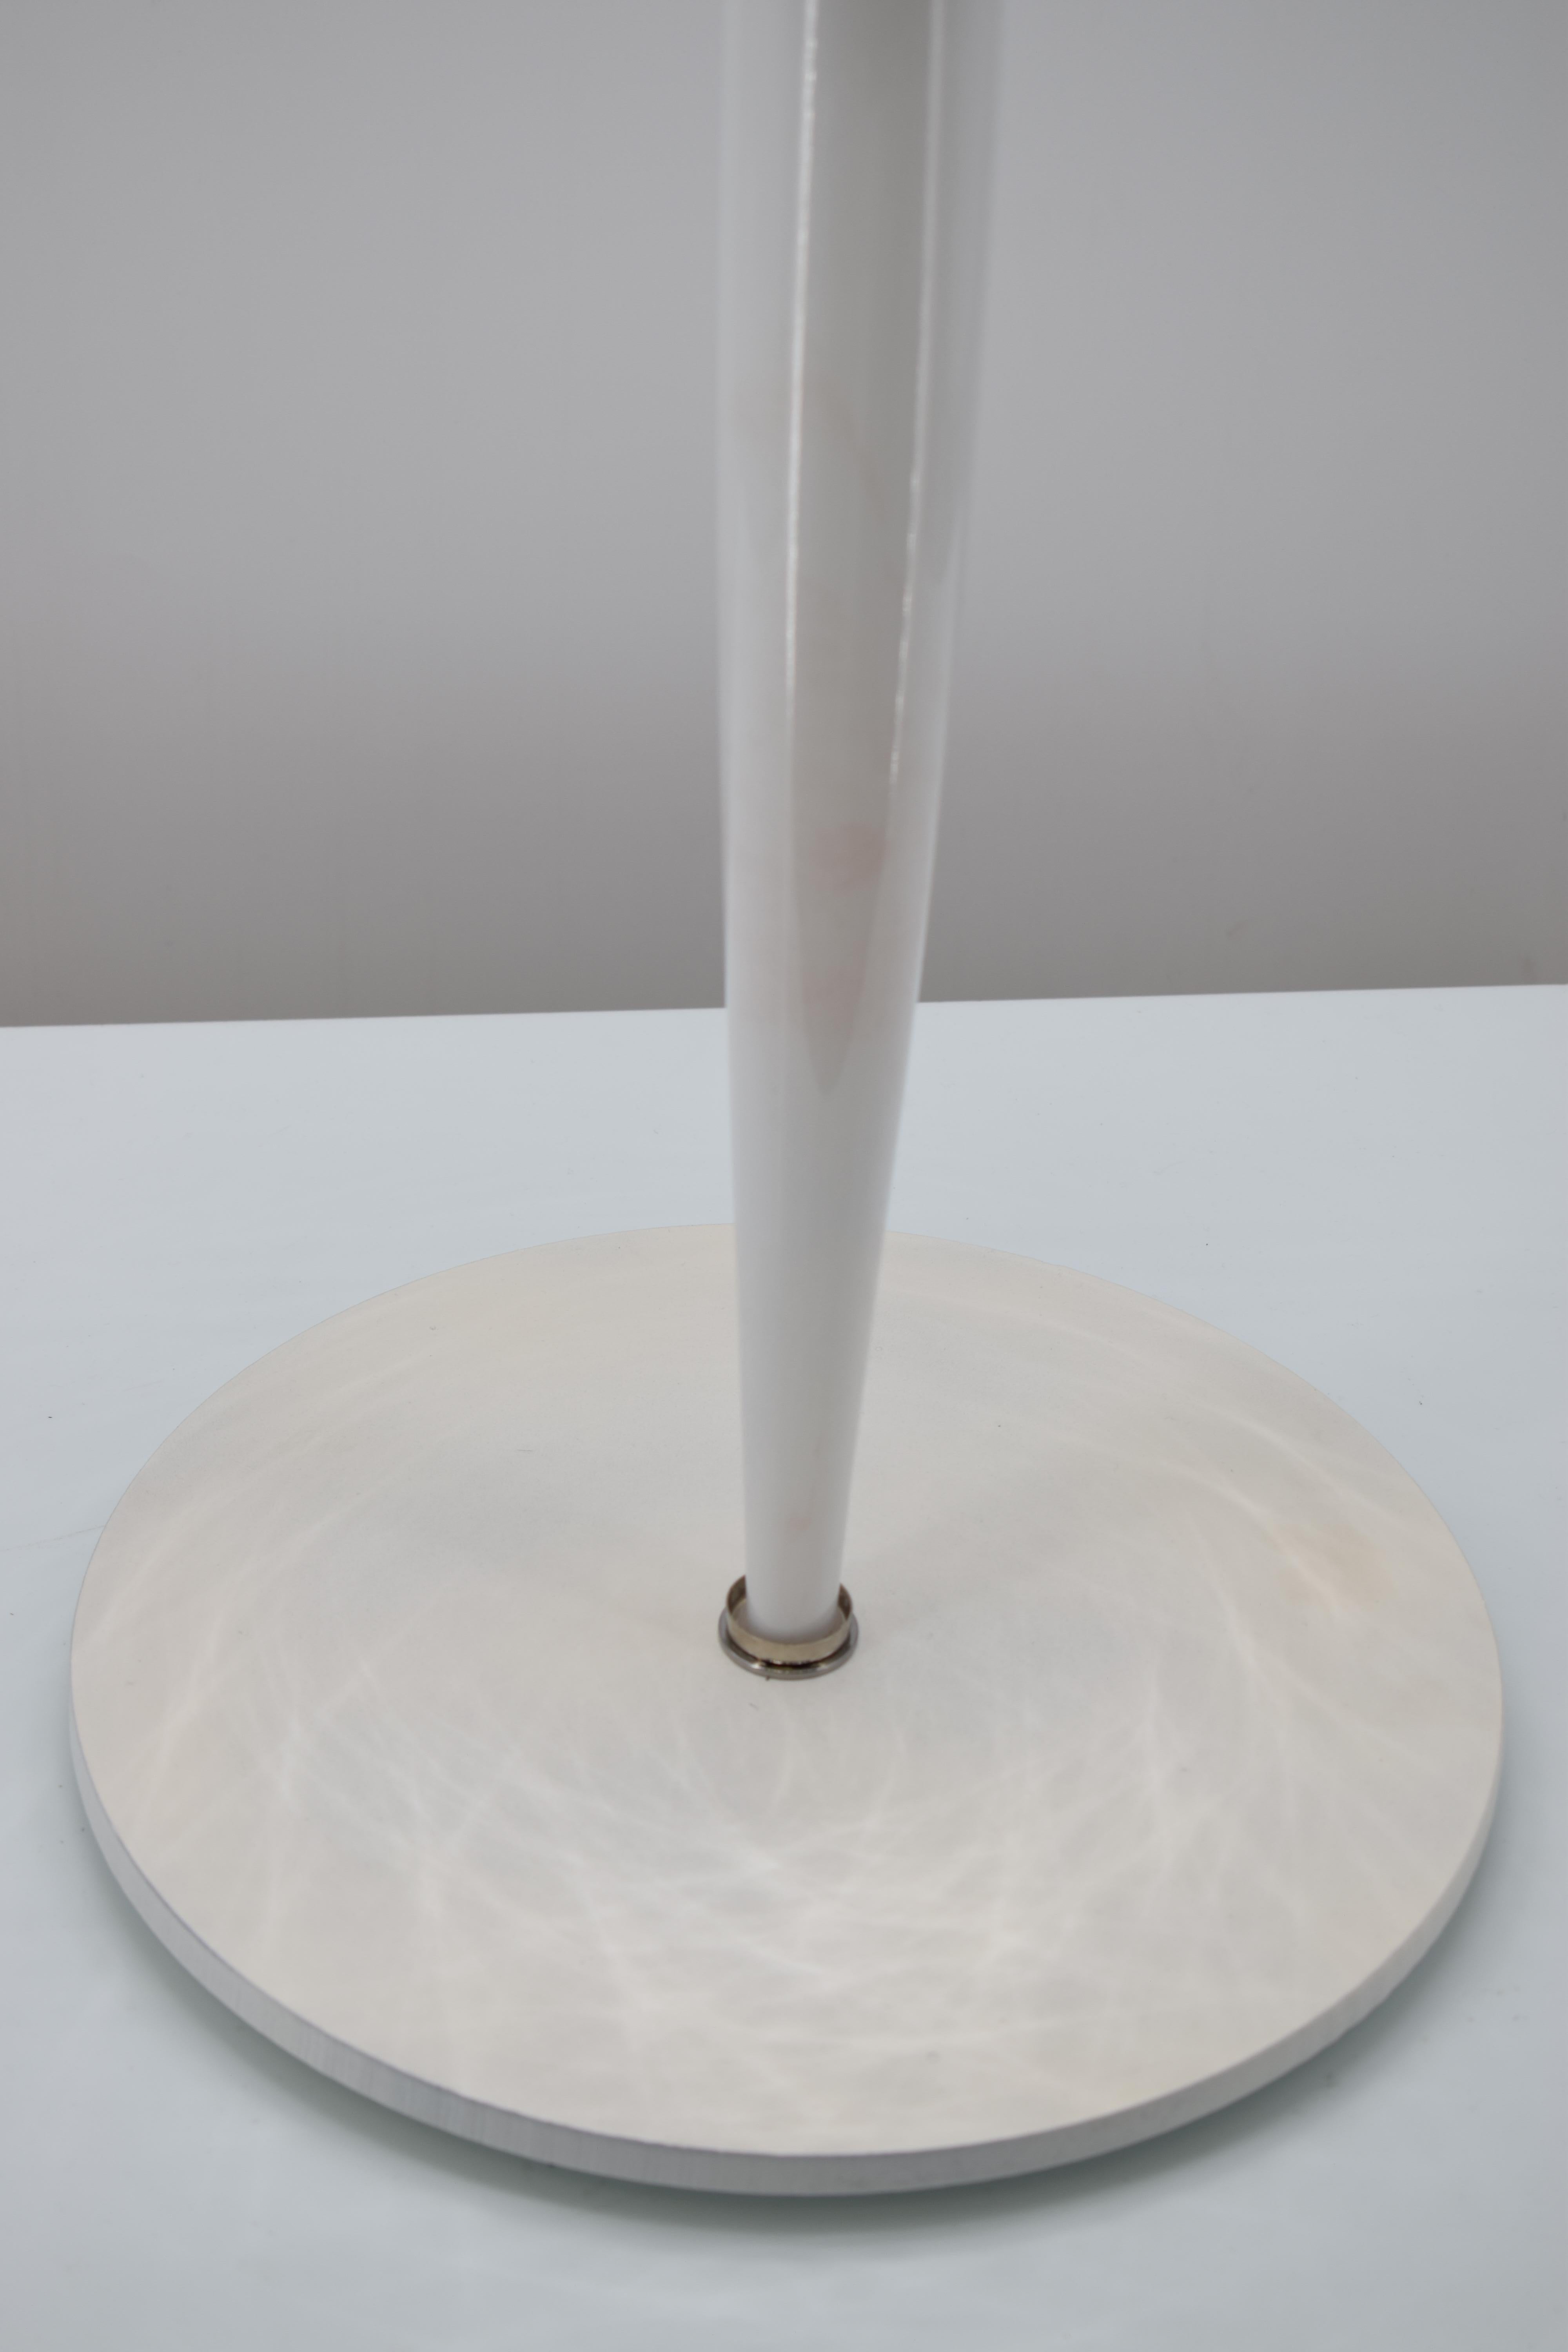 The Bolle collection of table lamps in blown glass represents an absolute novelty in the Eros Raffael production. This Venetian glass table lamp is a unique creation, which embodies some Murano glass production techniques. Bolle is an eclectic